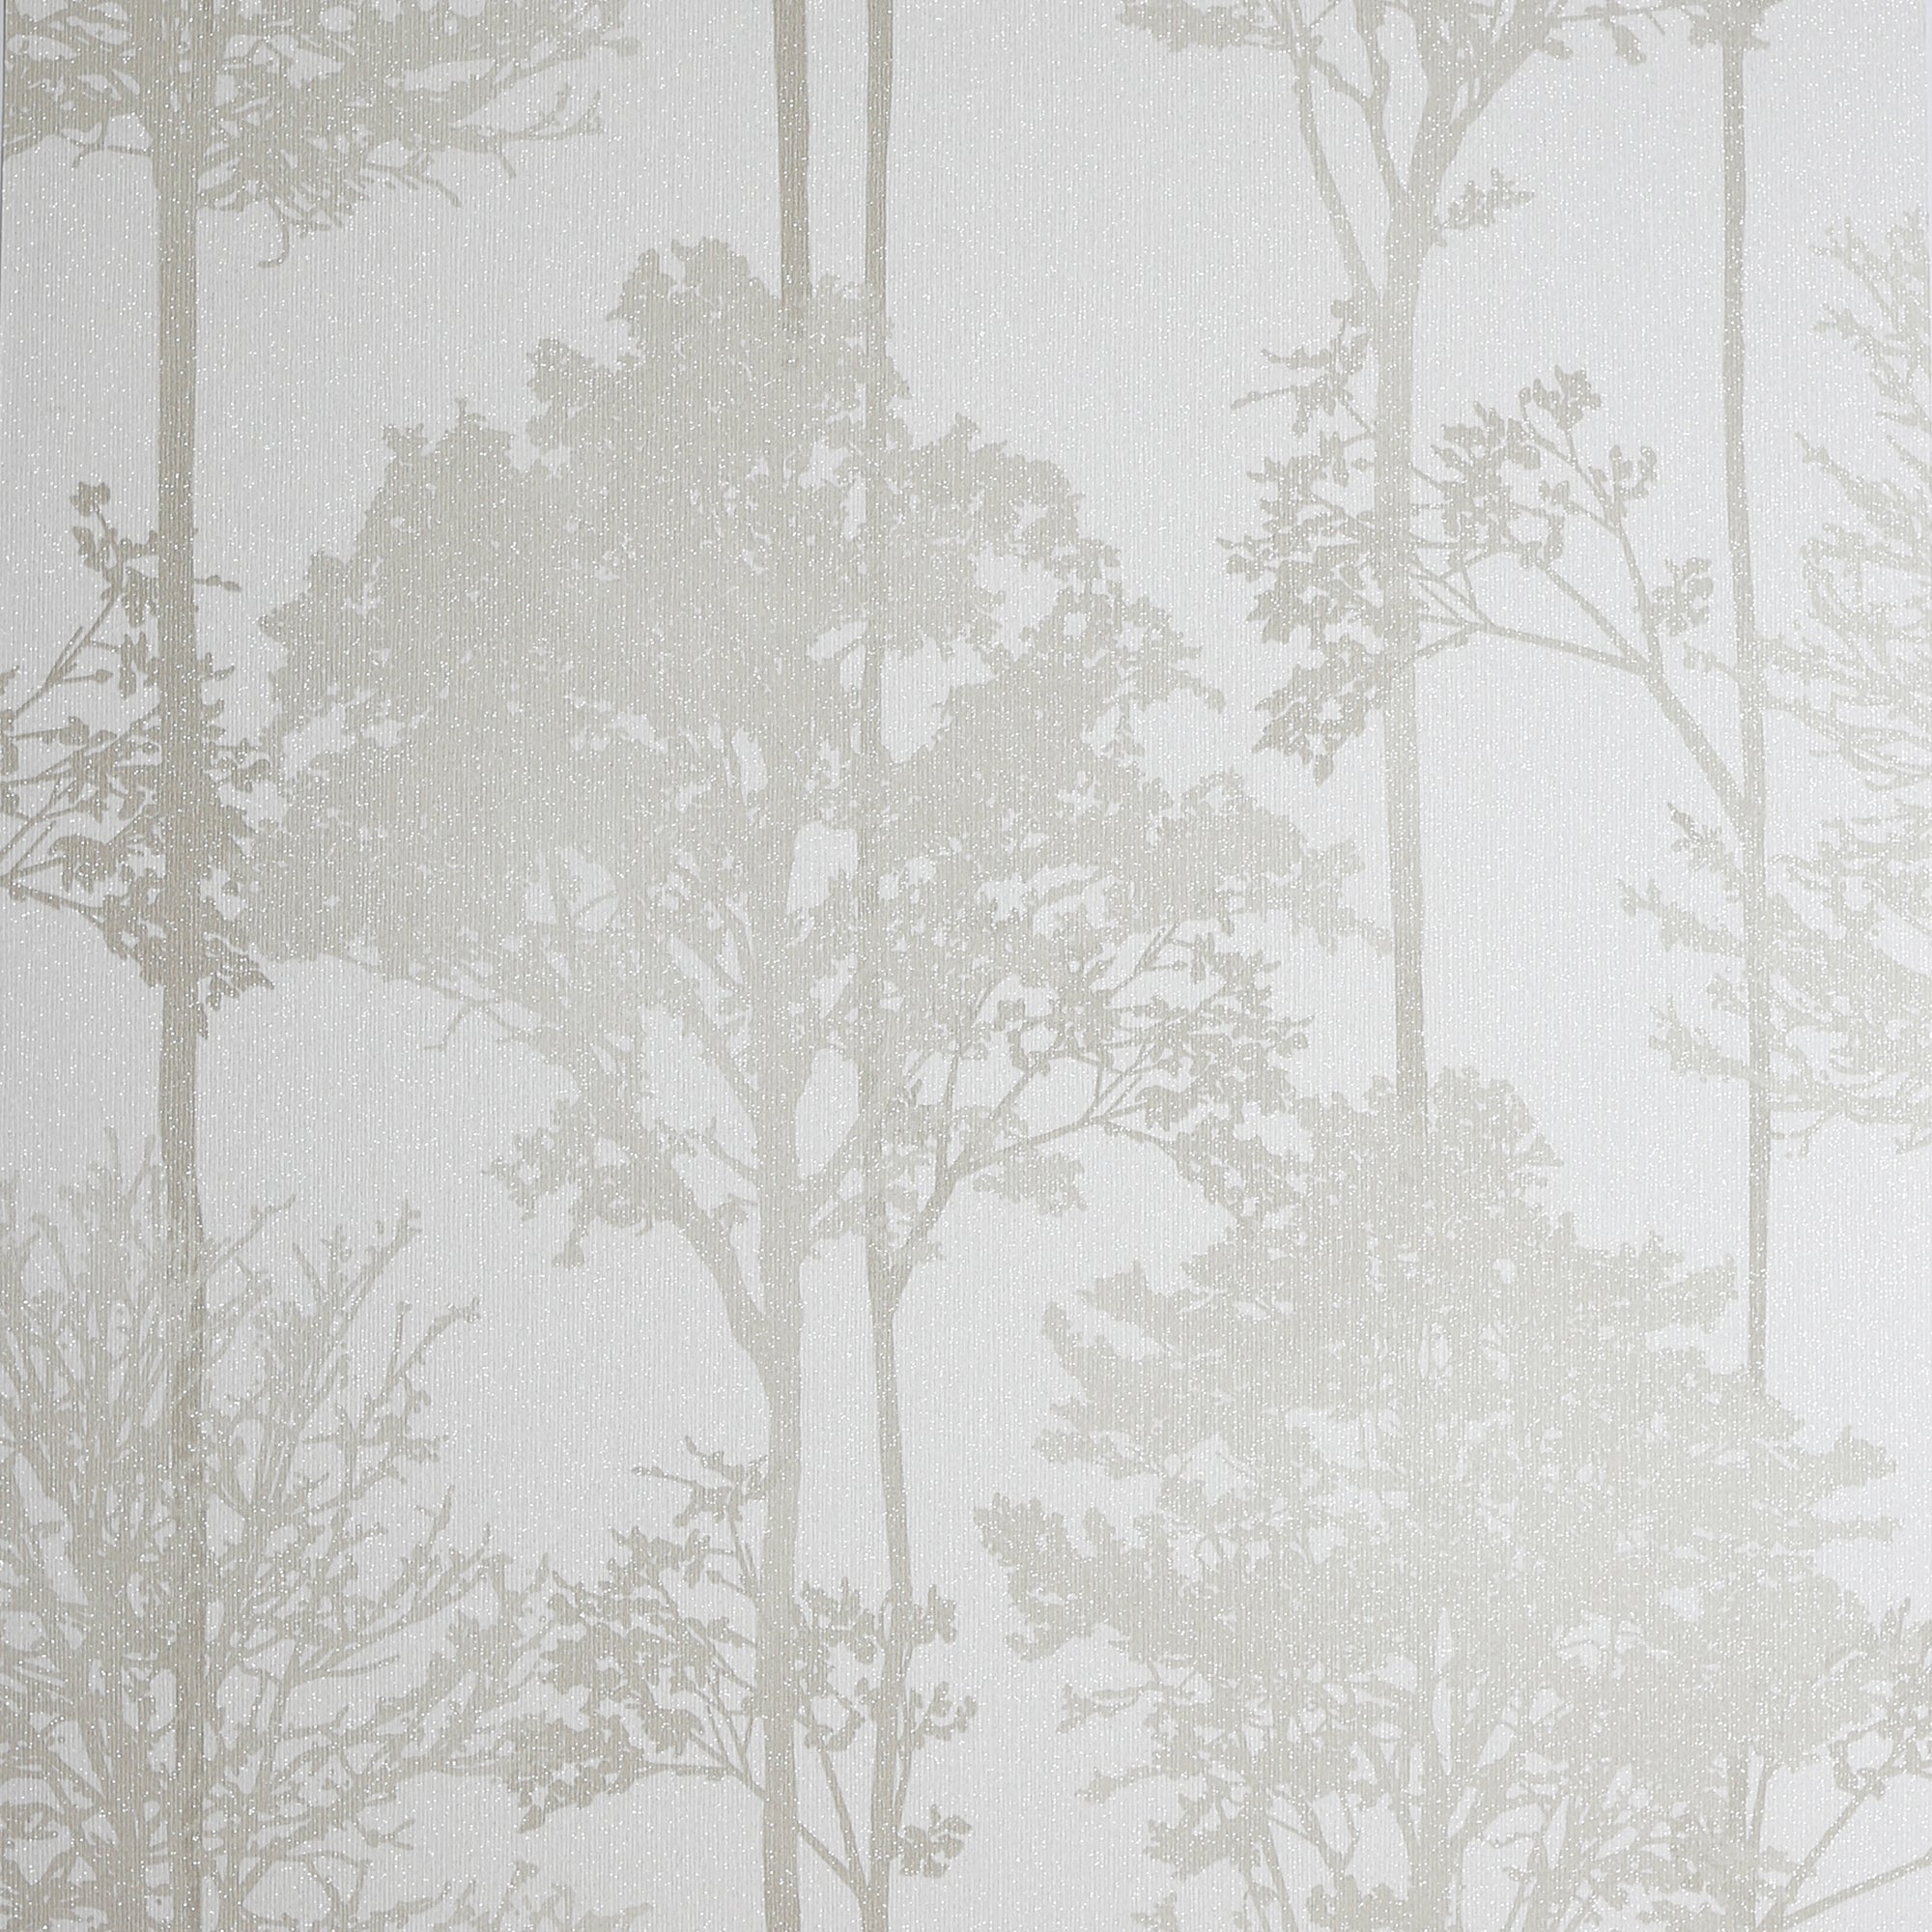 Stardust Tree Wallpaper 296102 by Arthouse